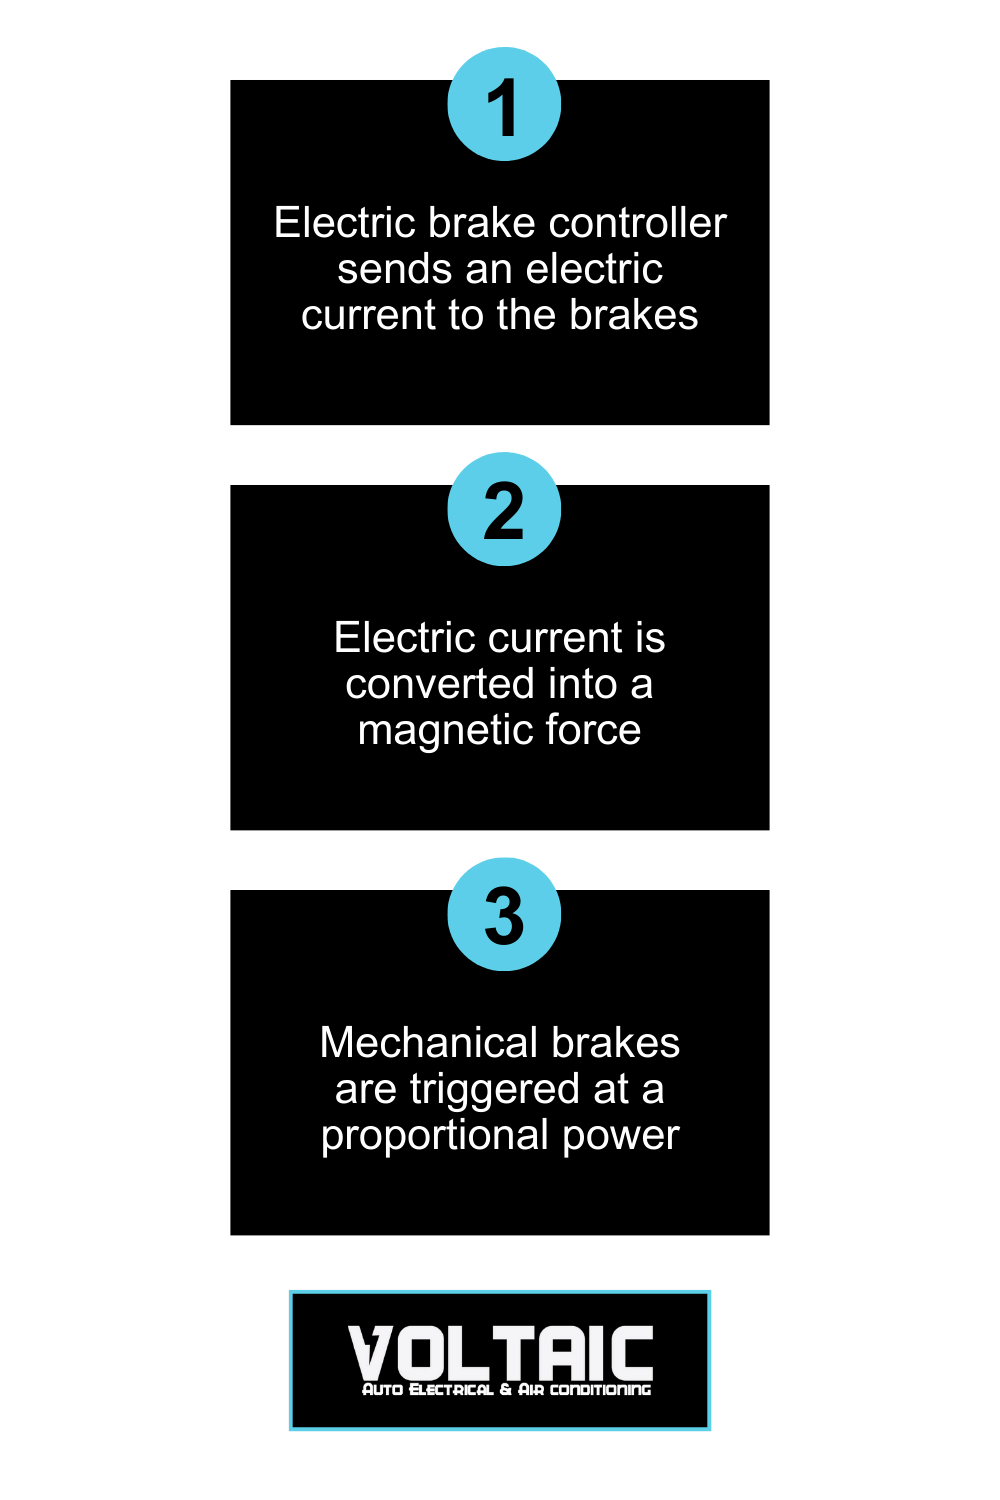 Infographic showing how electric trailer brakes work in 3 steps including sending an electric current, magnetising mechanical brakes, and applying brakes